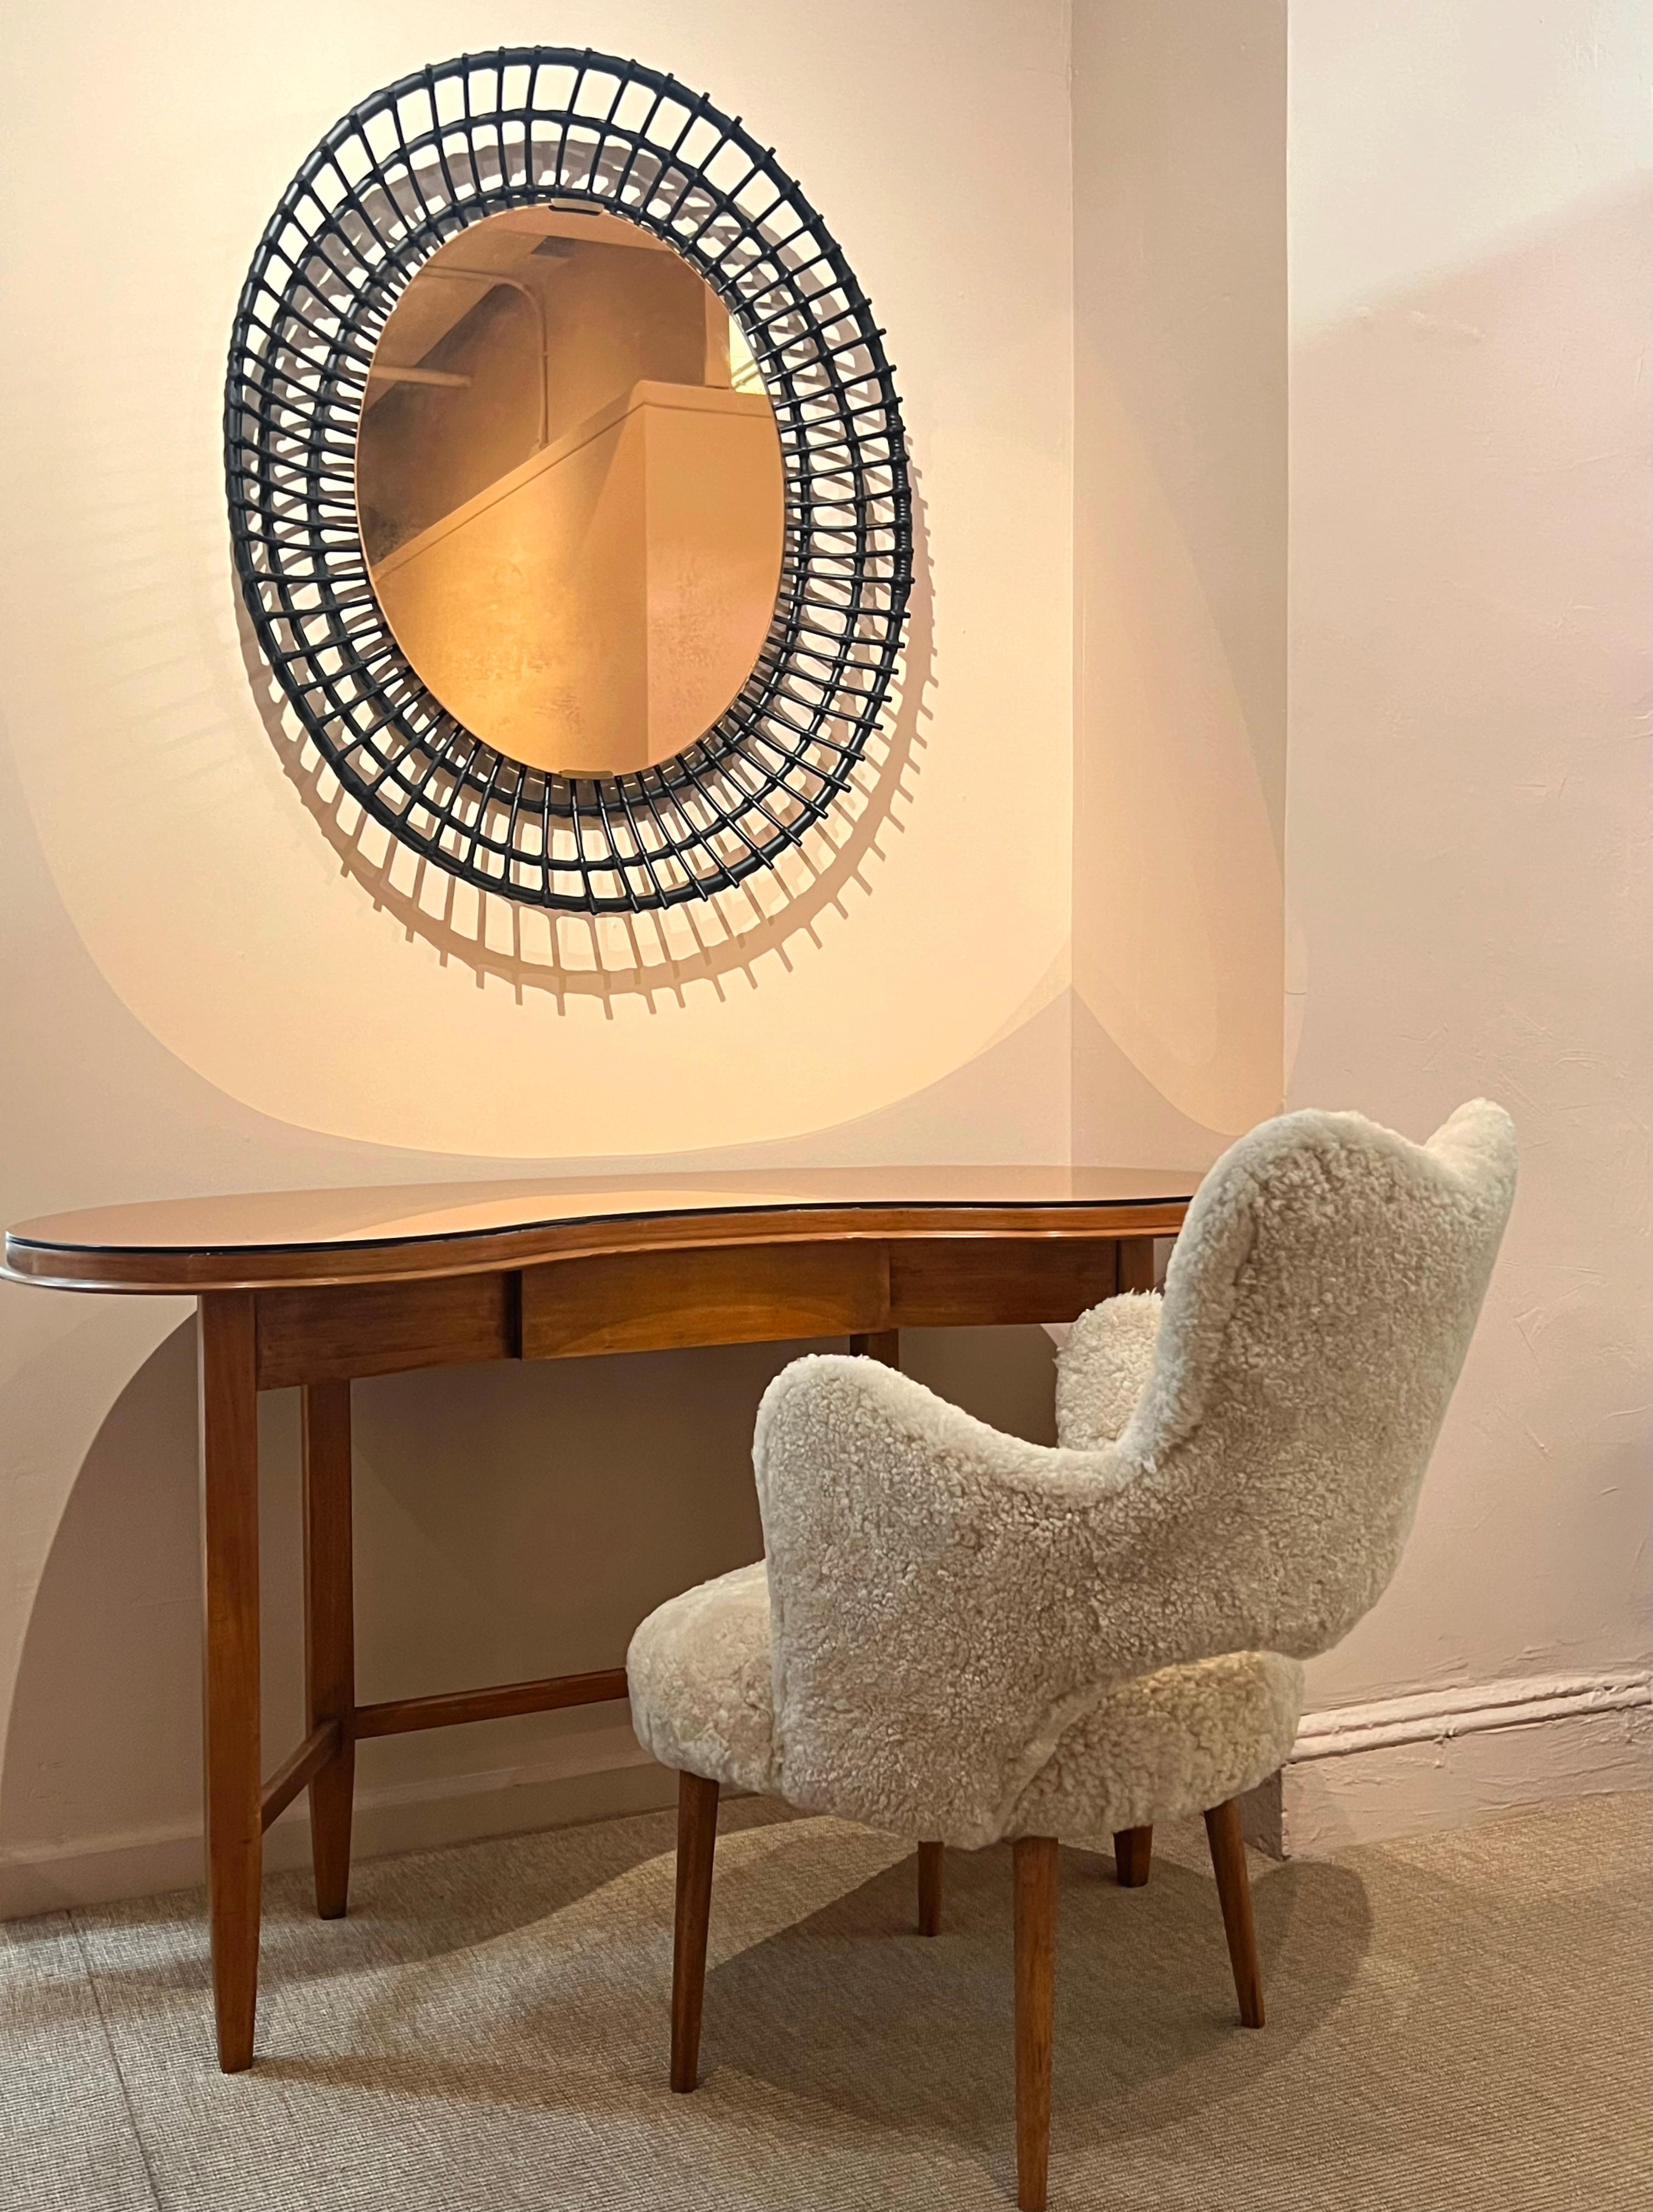 A stunning Gio Ponti Console Table in Walnut, glass, and tinted mirror.
Creation date: circa 1935. The copper mirror glass top has been replaced, replicating the original.

Bibliography: La casa all'italiana, Editoriale Domus, Milan, 1933, similar